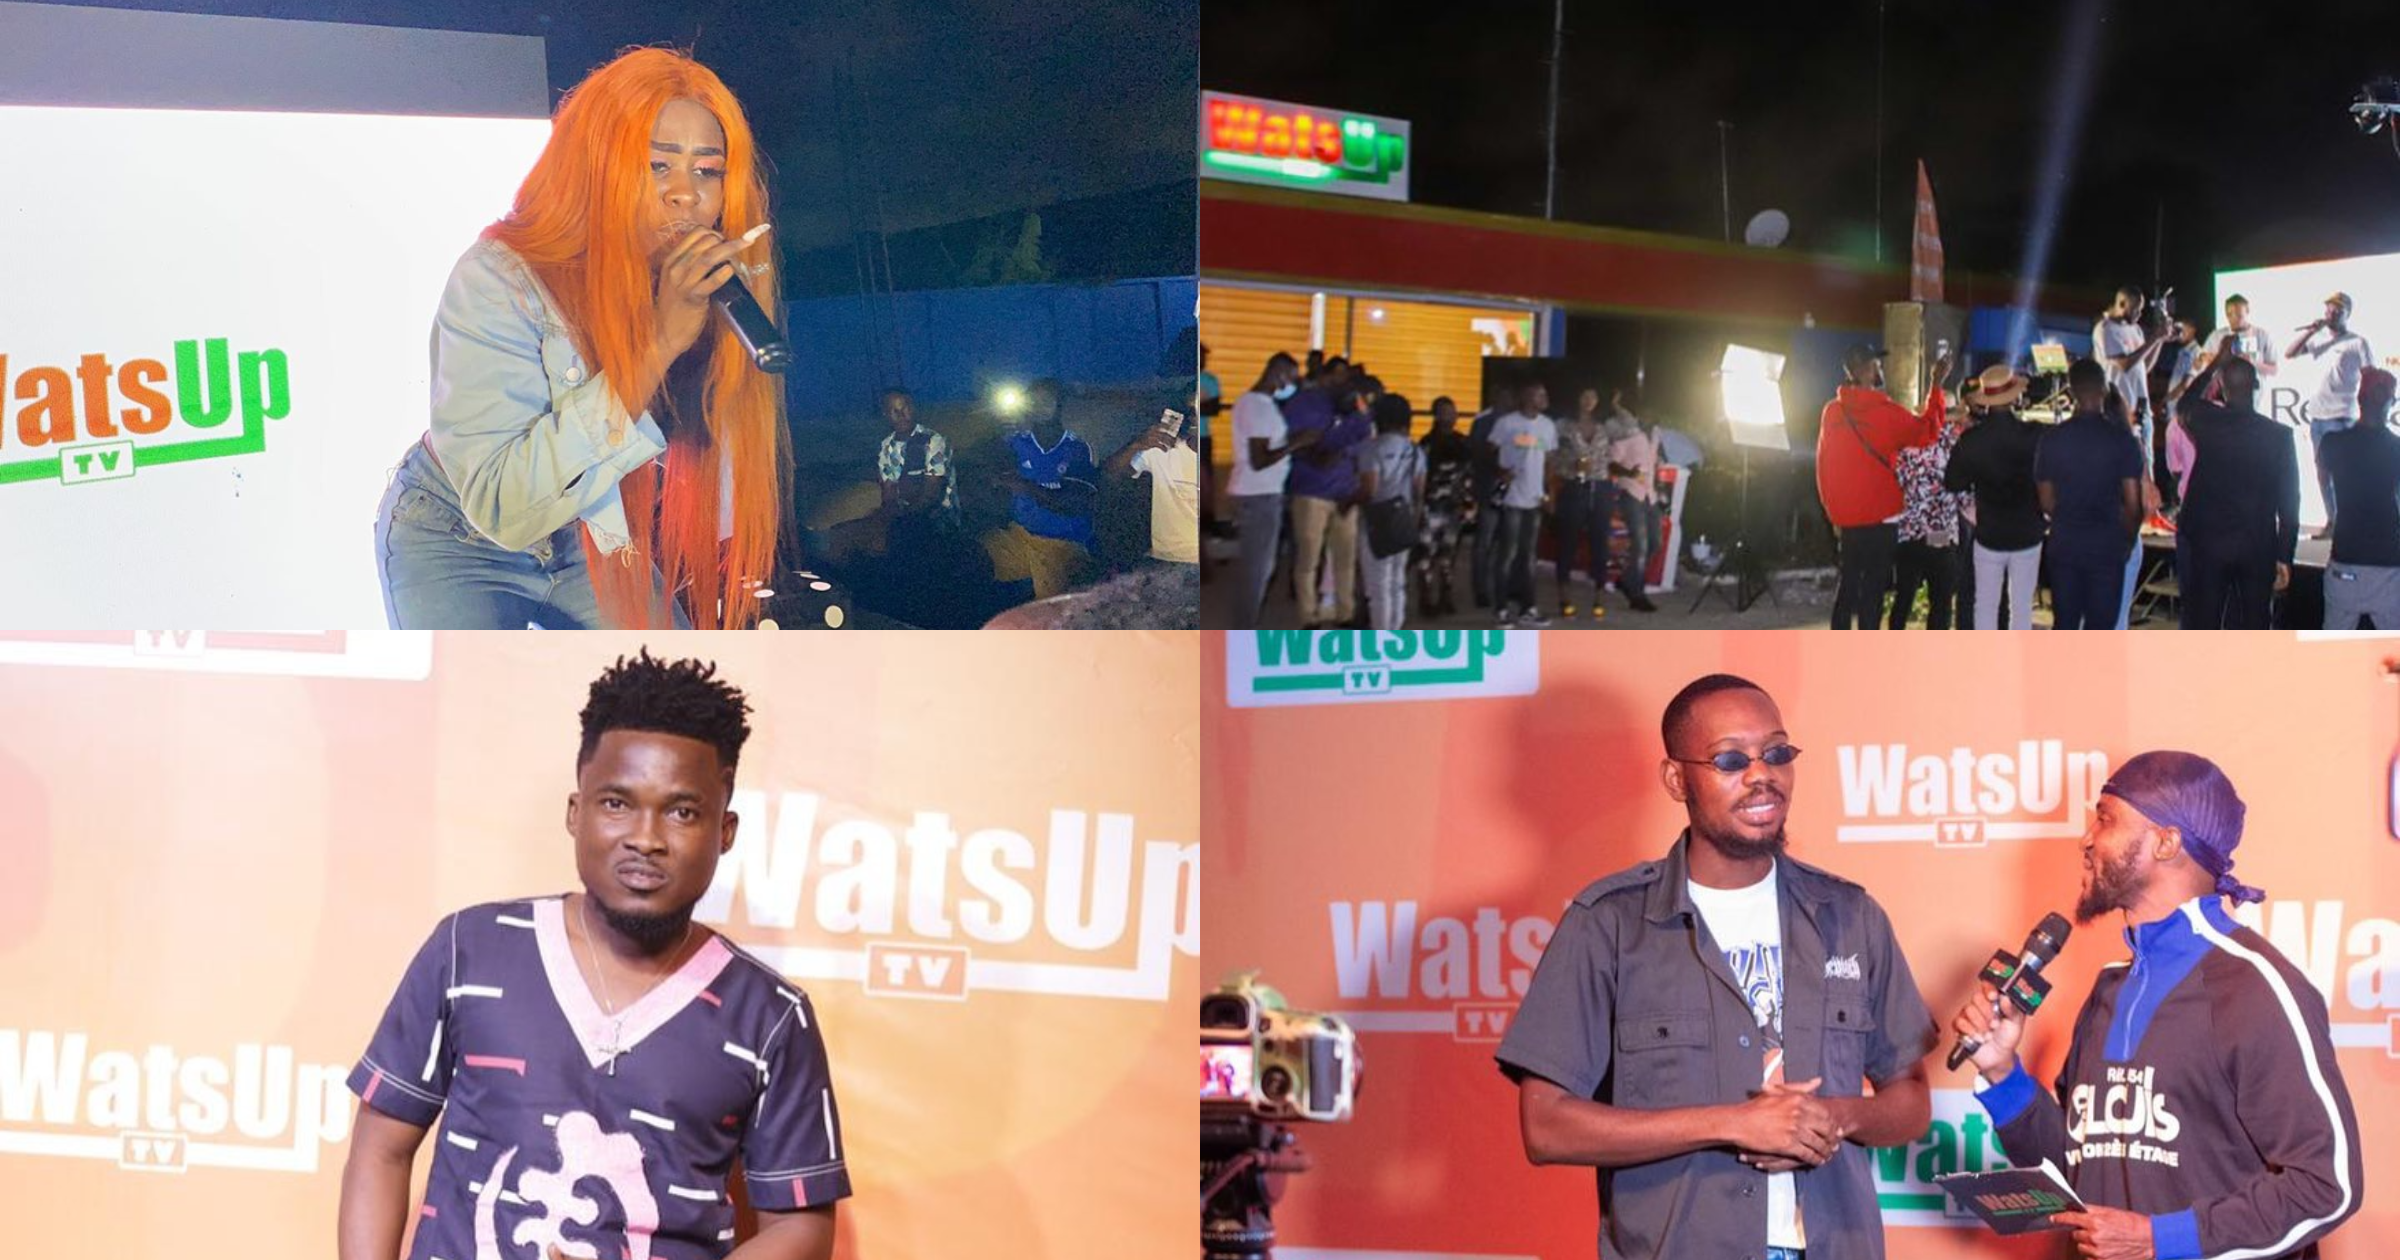 Beautiful videos and photo drop as music stars throng WatsUp TV's 24-hour channel launch